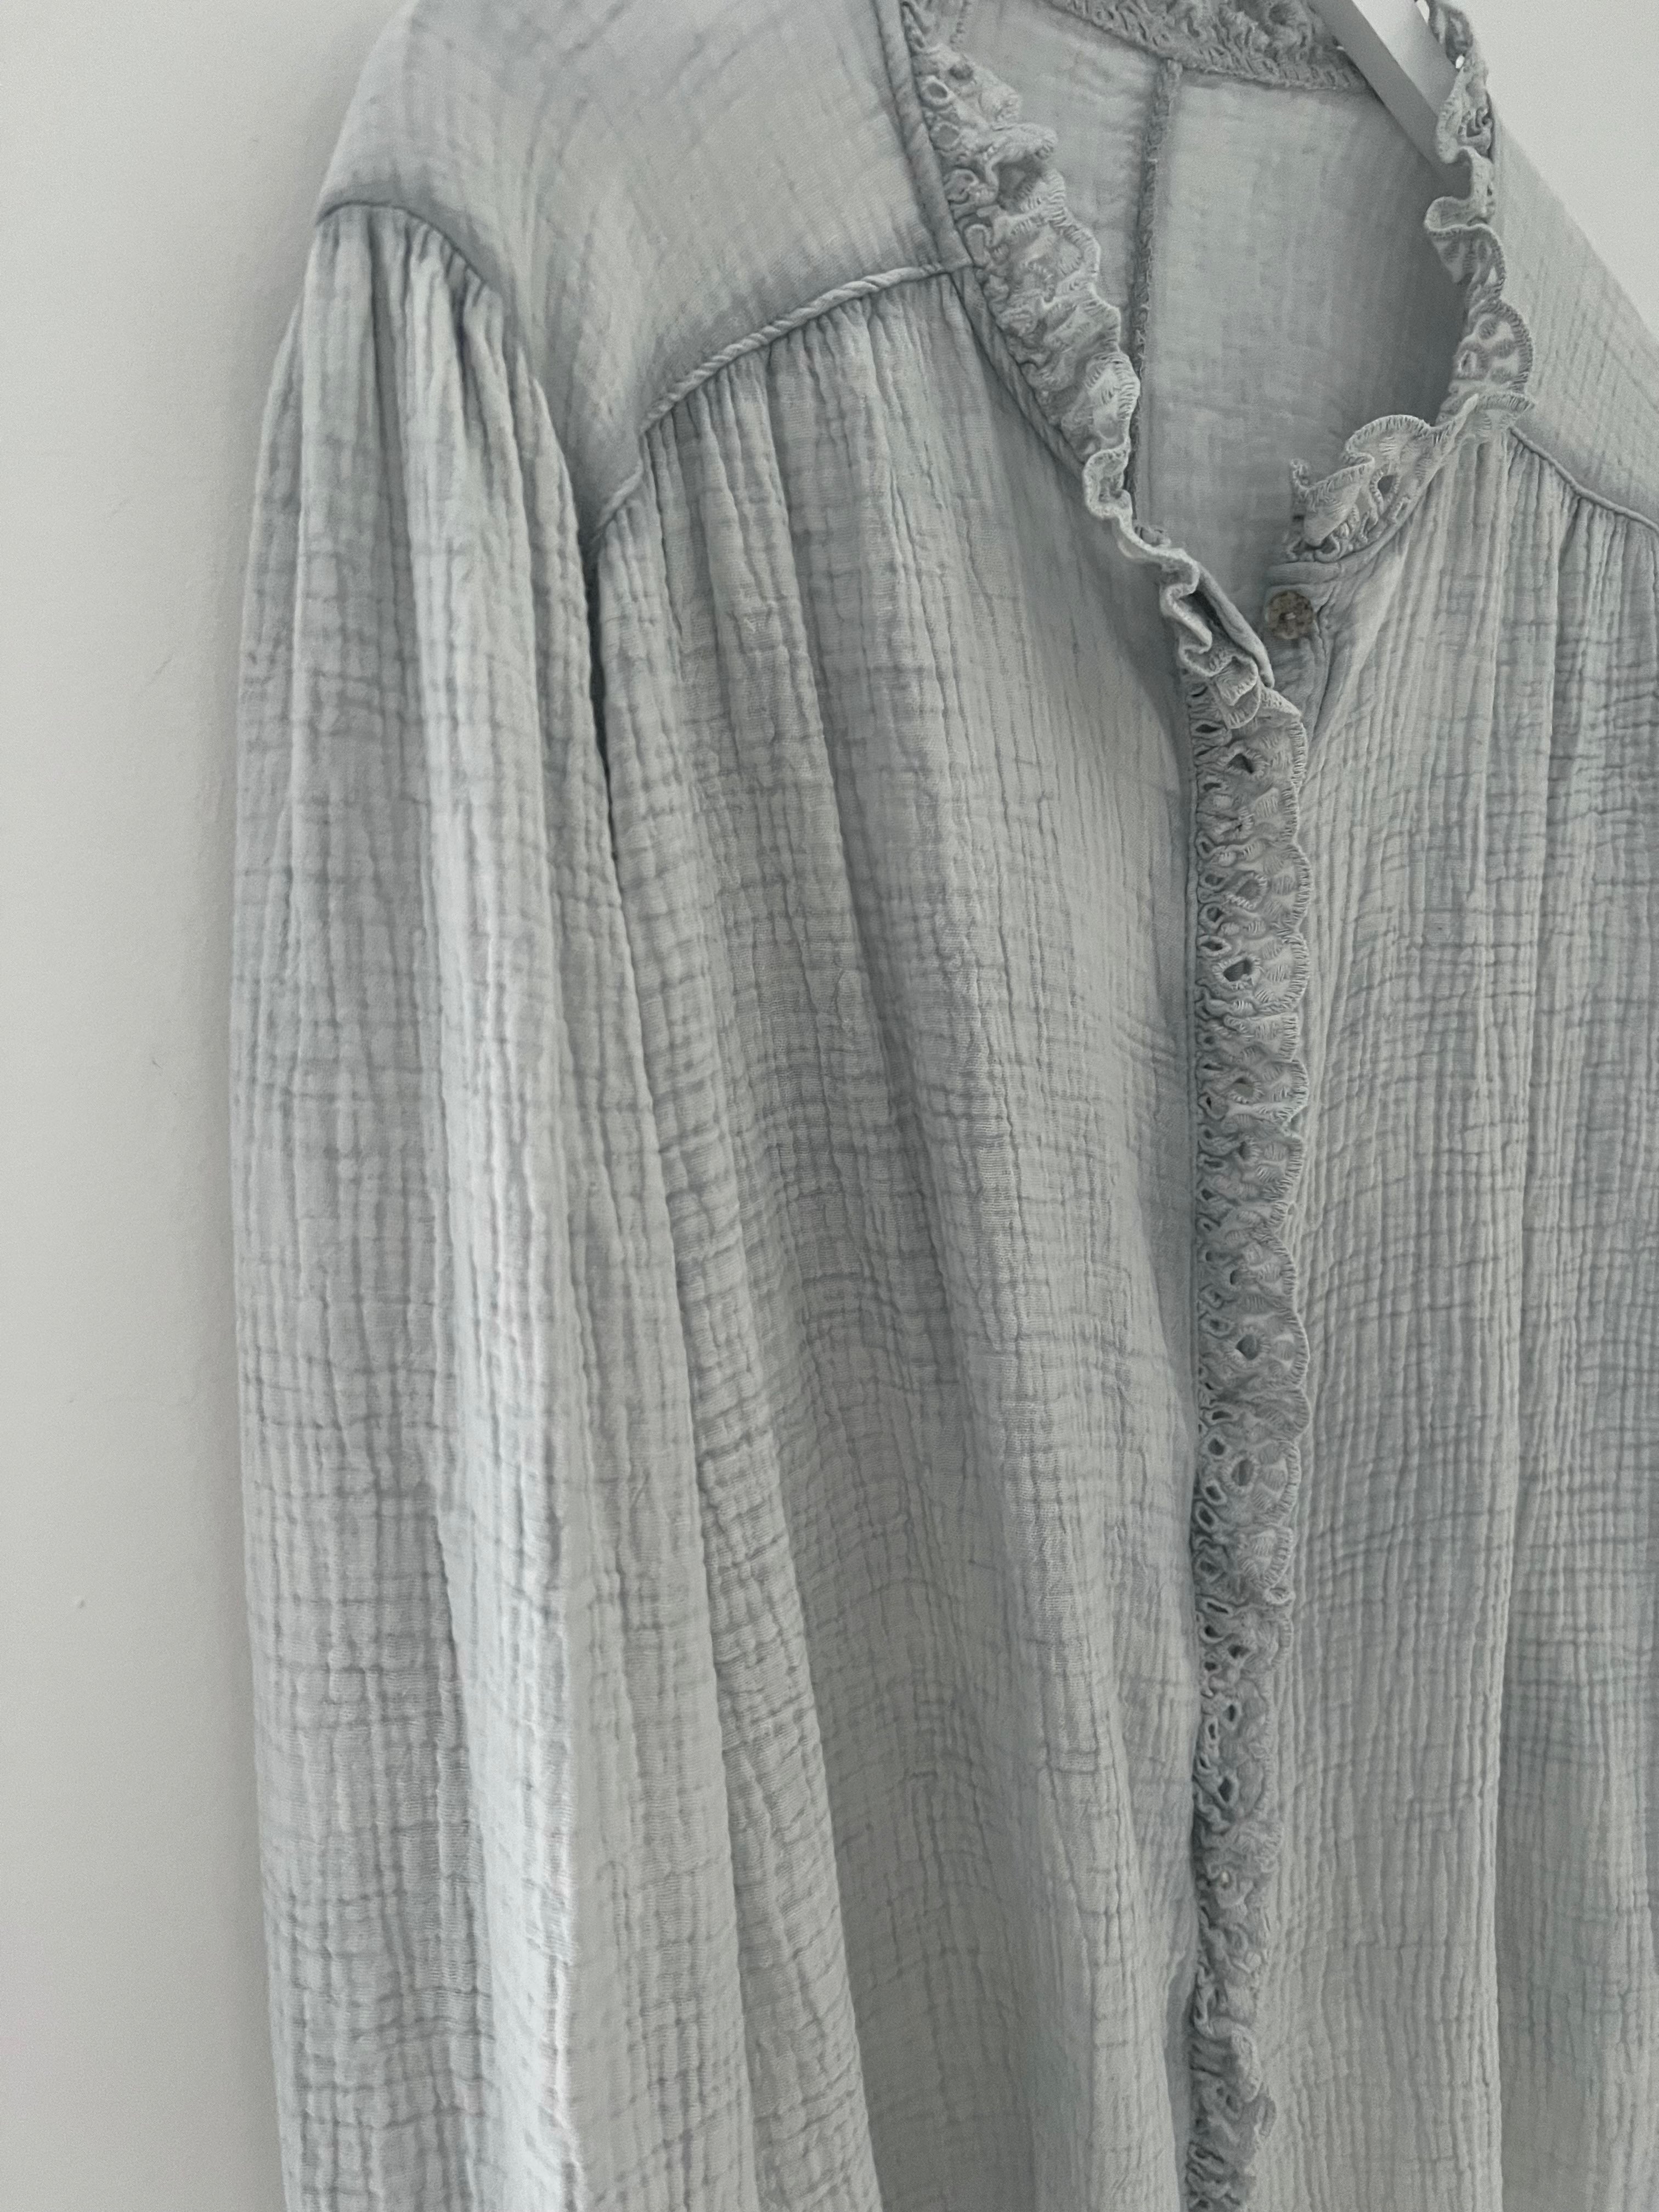 Cheesecloth Shirt in Soft Grey